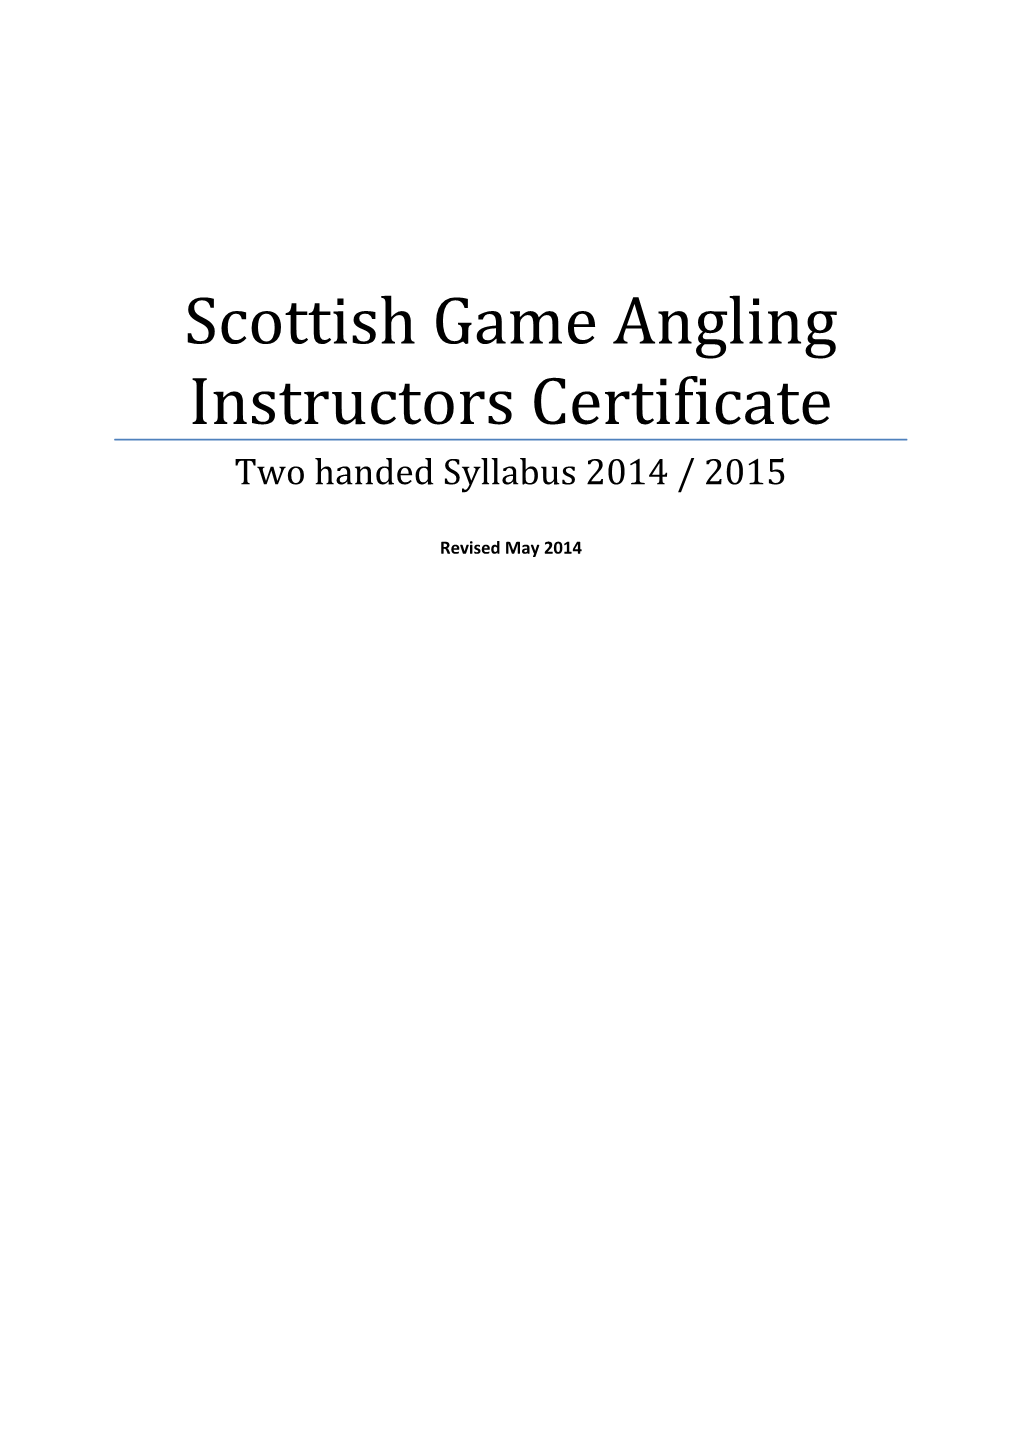 Scottish Game Angling Instructors Certificate